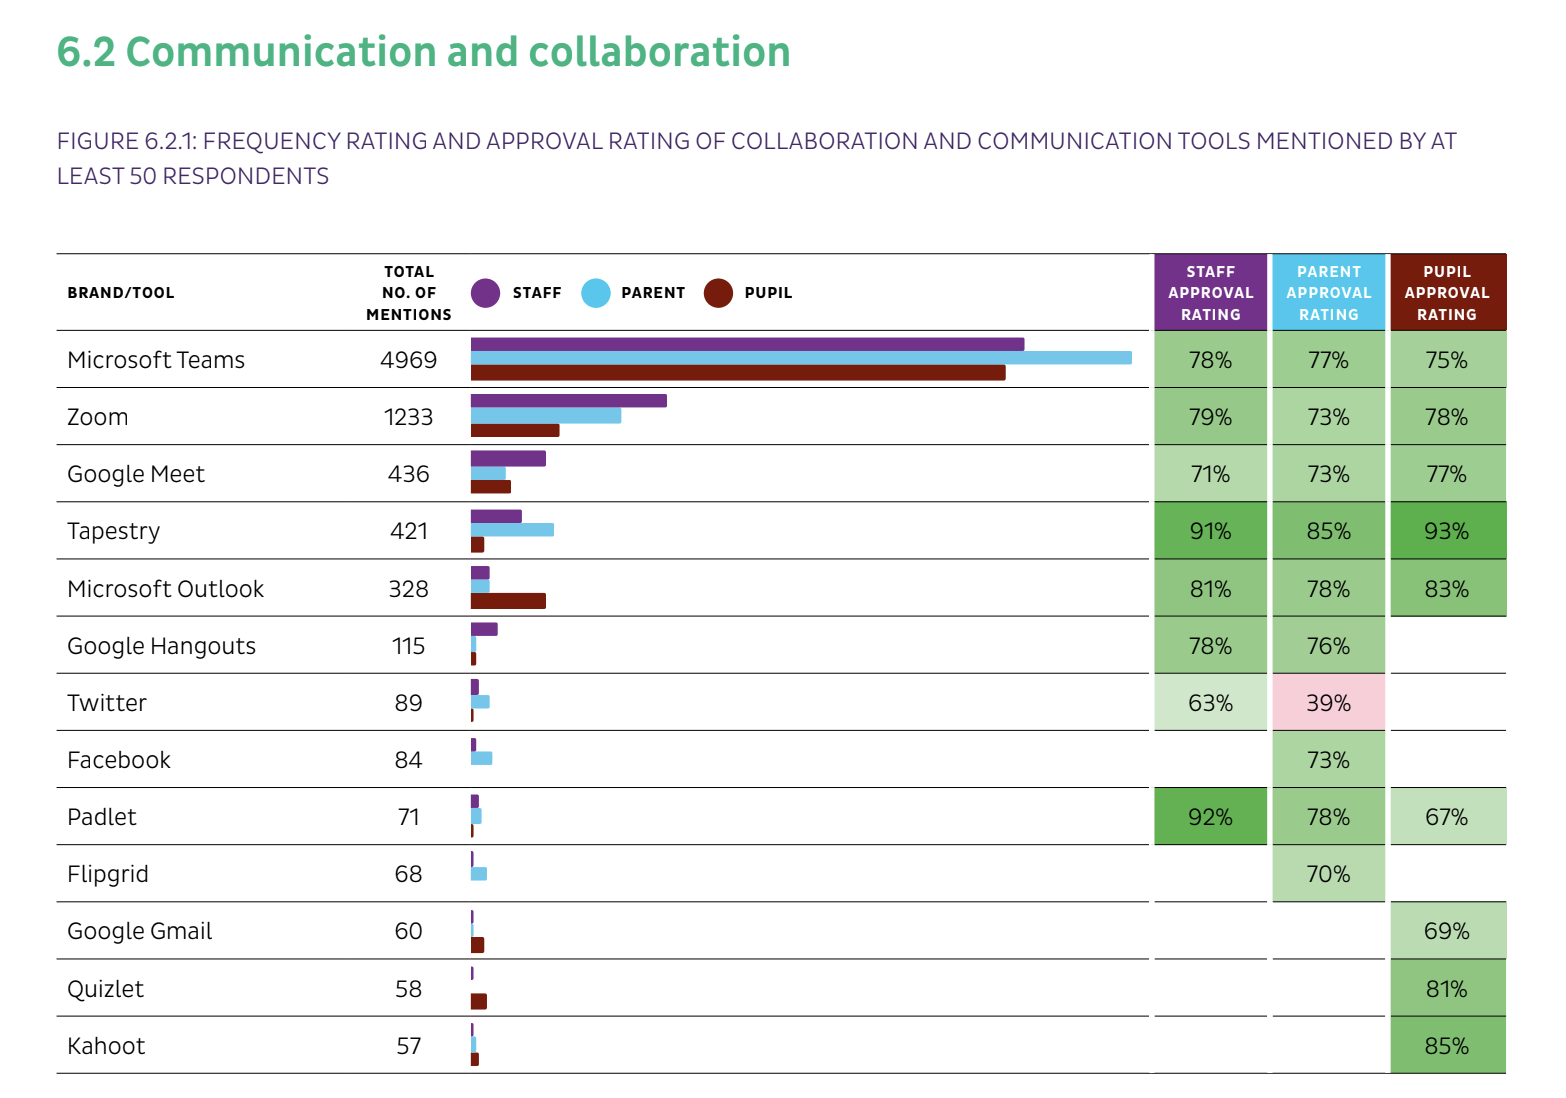 Remote Learning_Approval rating of collaboration and communication educational tools mentioned by at least 50 respondents